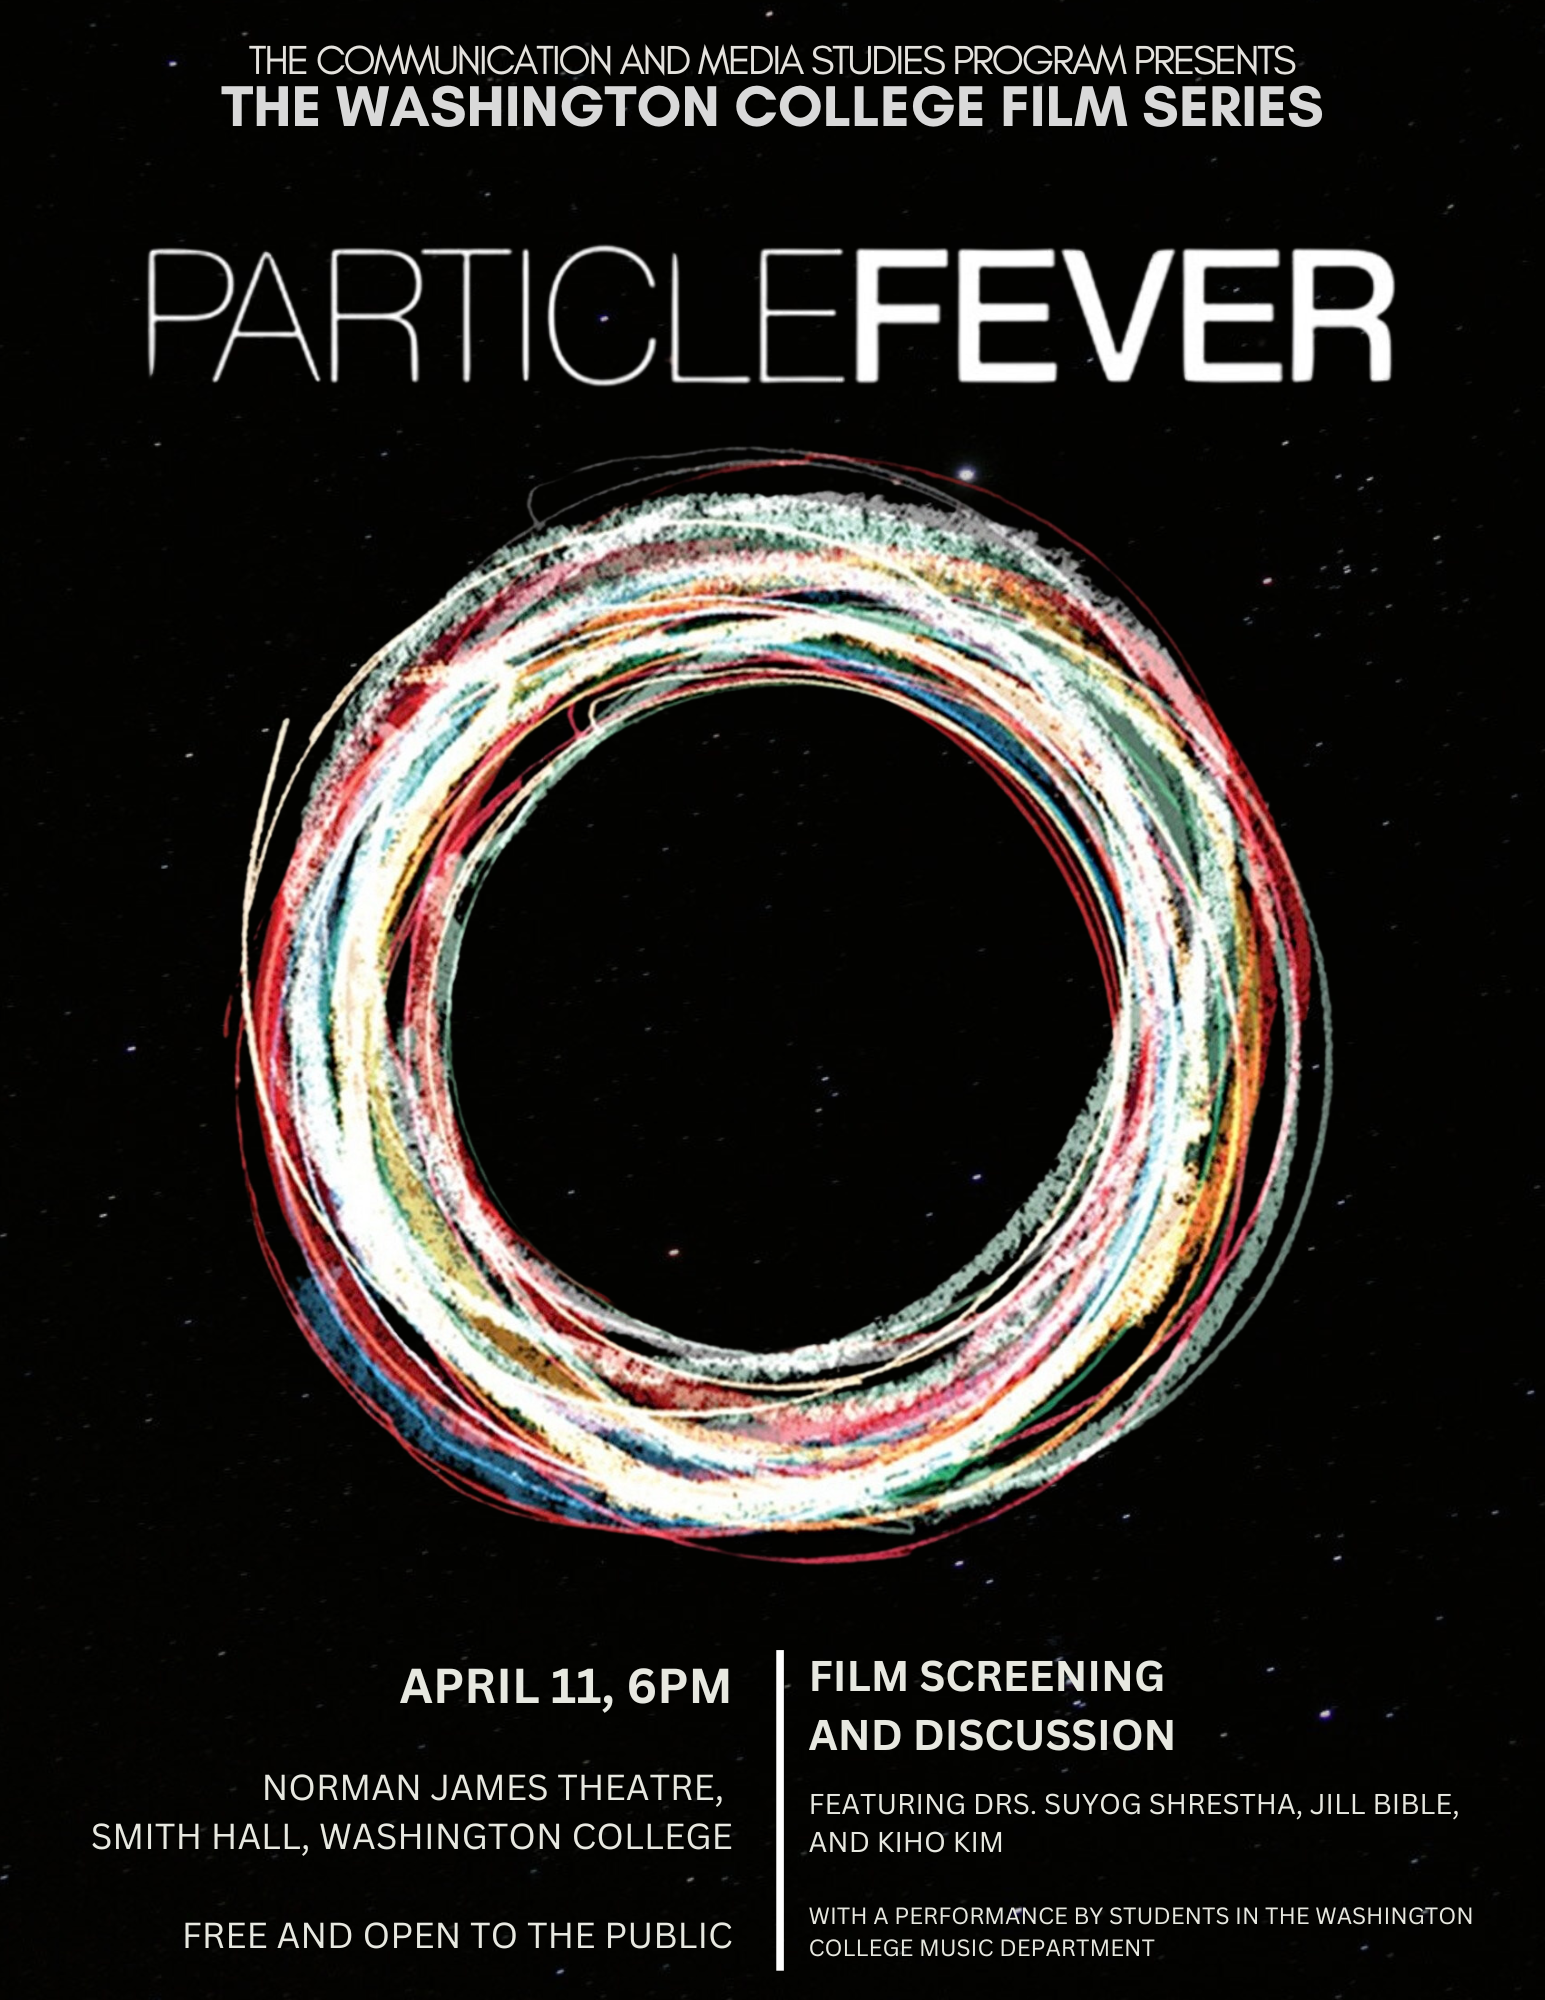 Movie poster for the film Particle fever